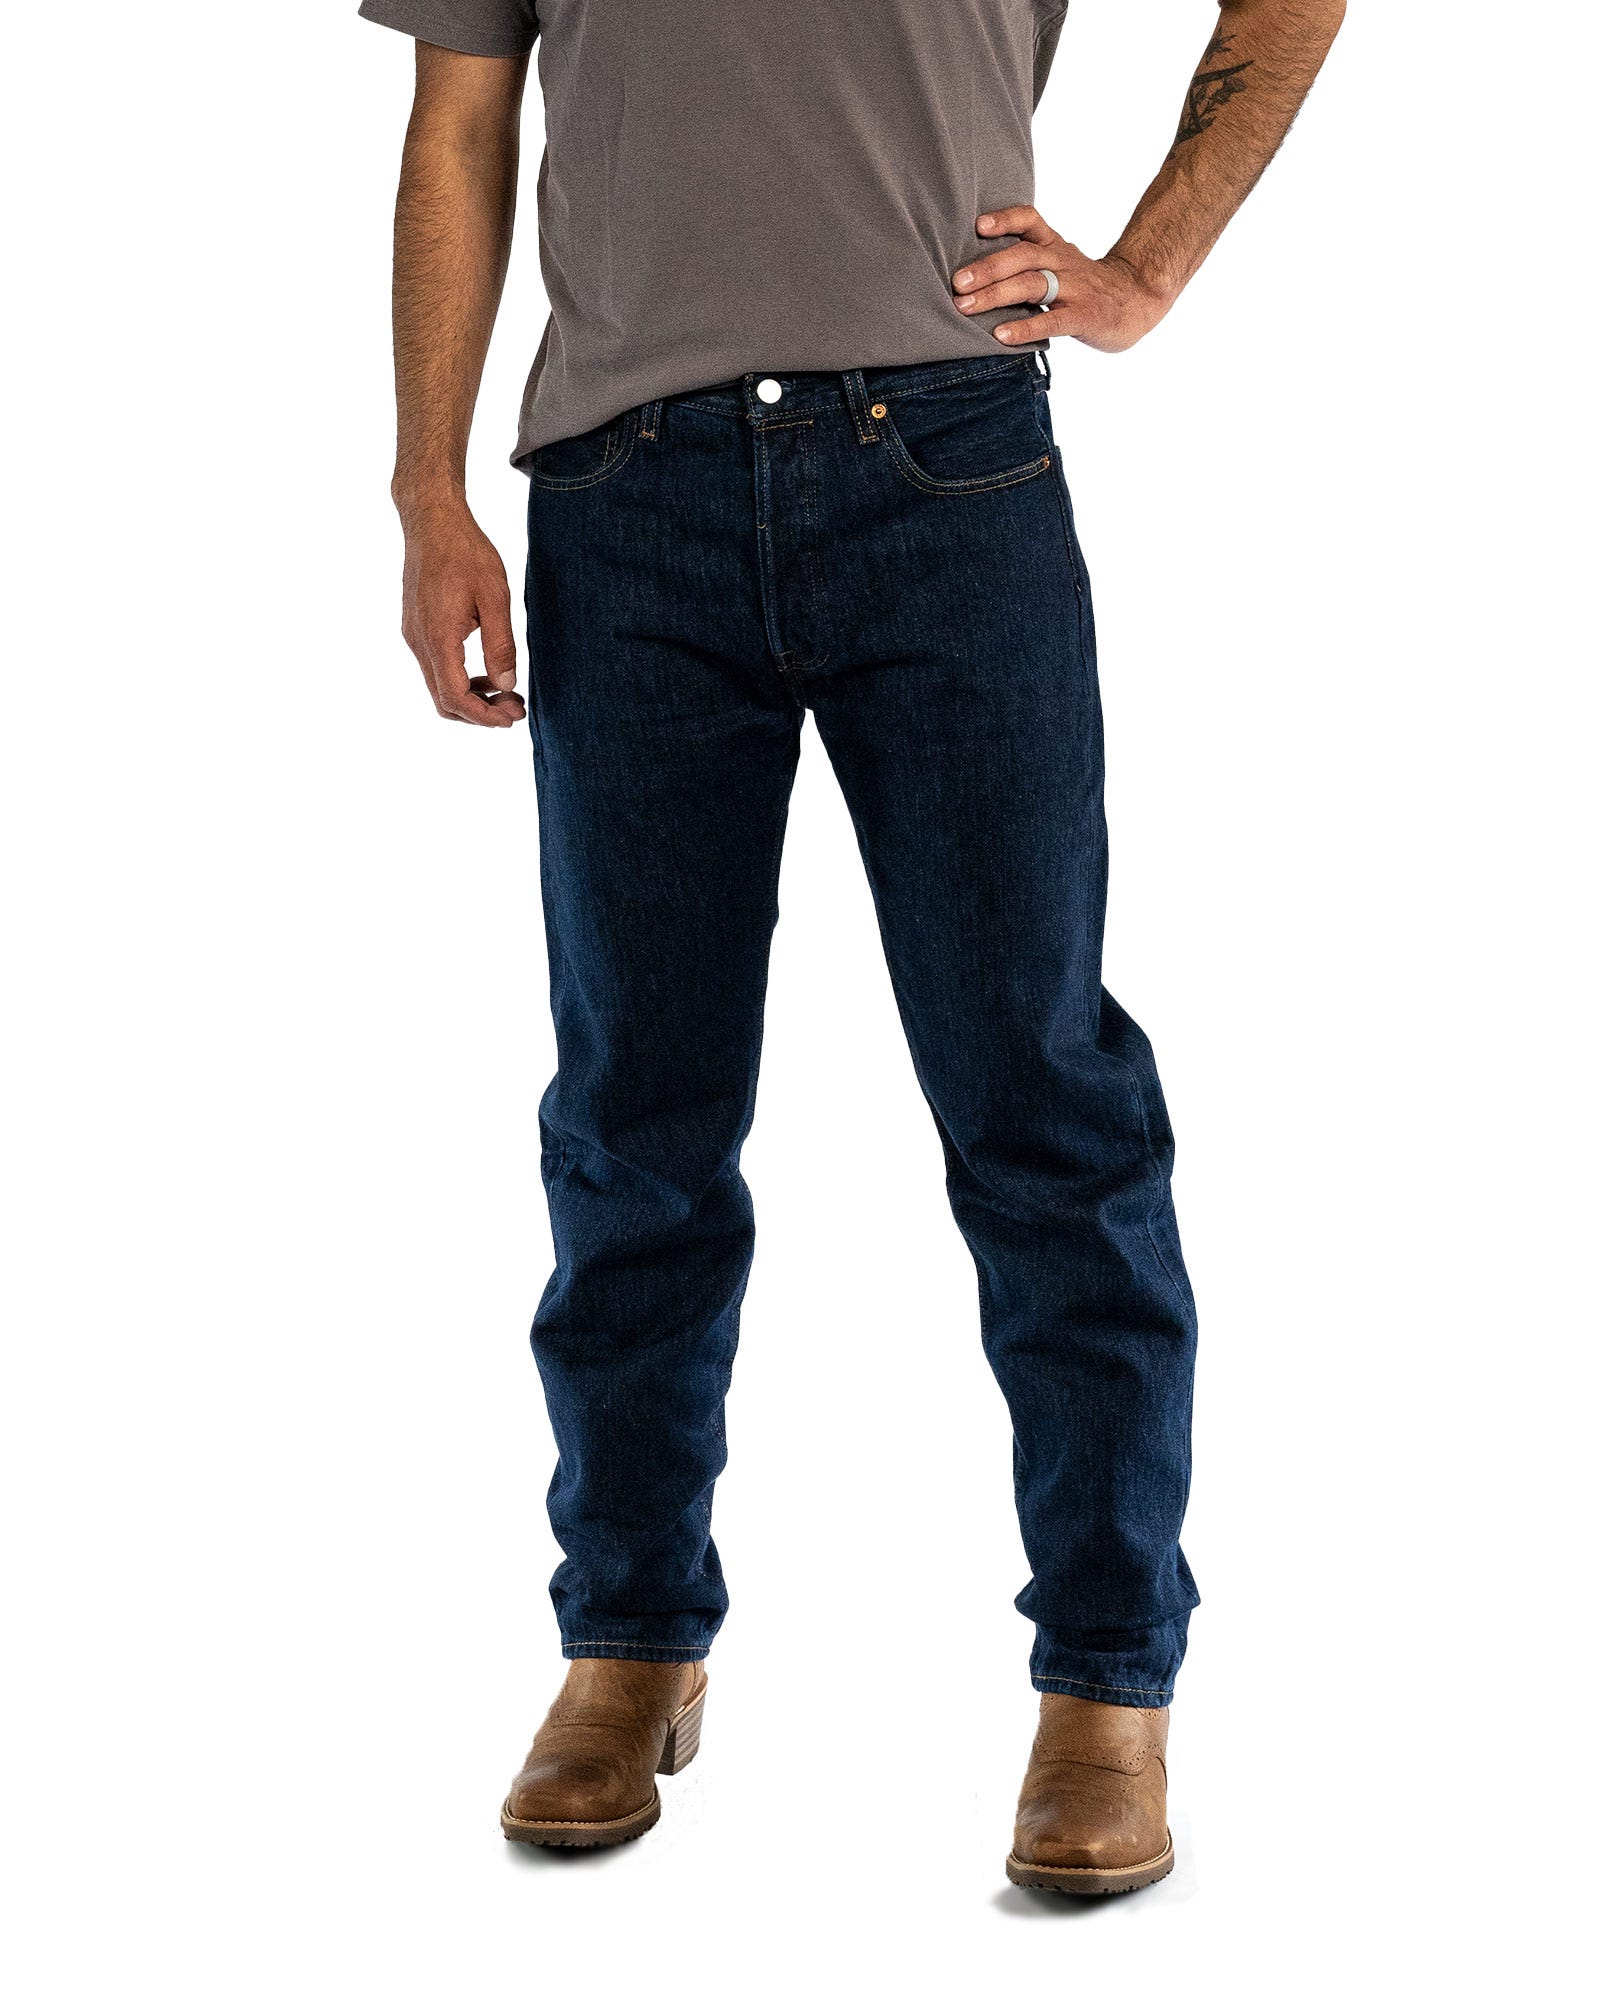 A front view of the Levi's 501 jeans